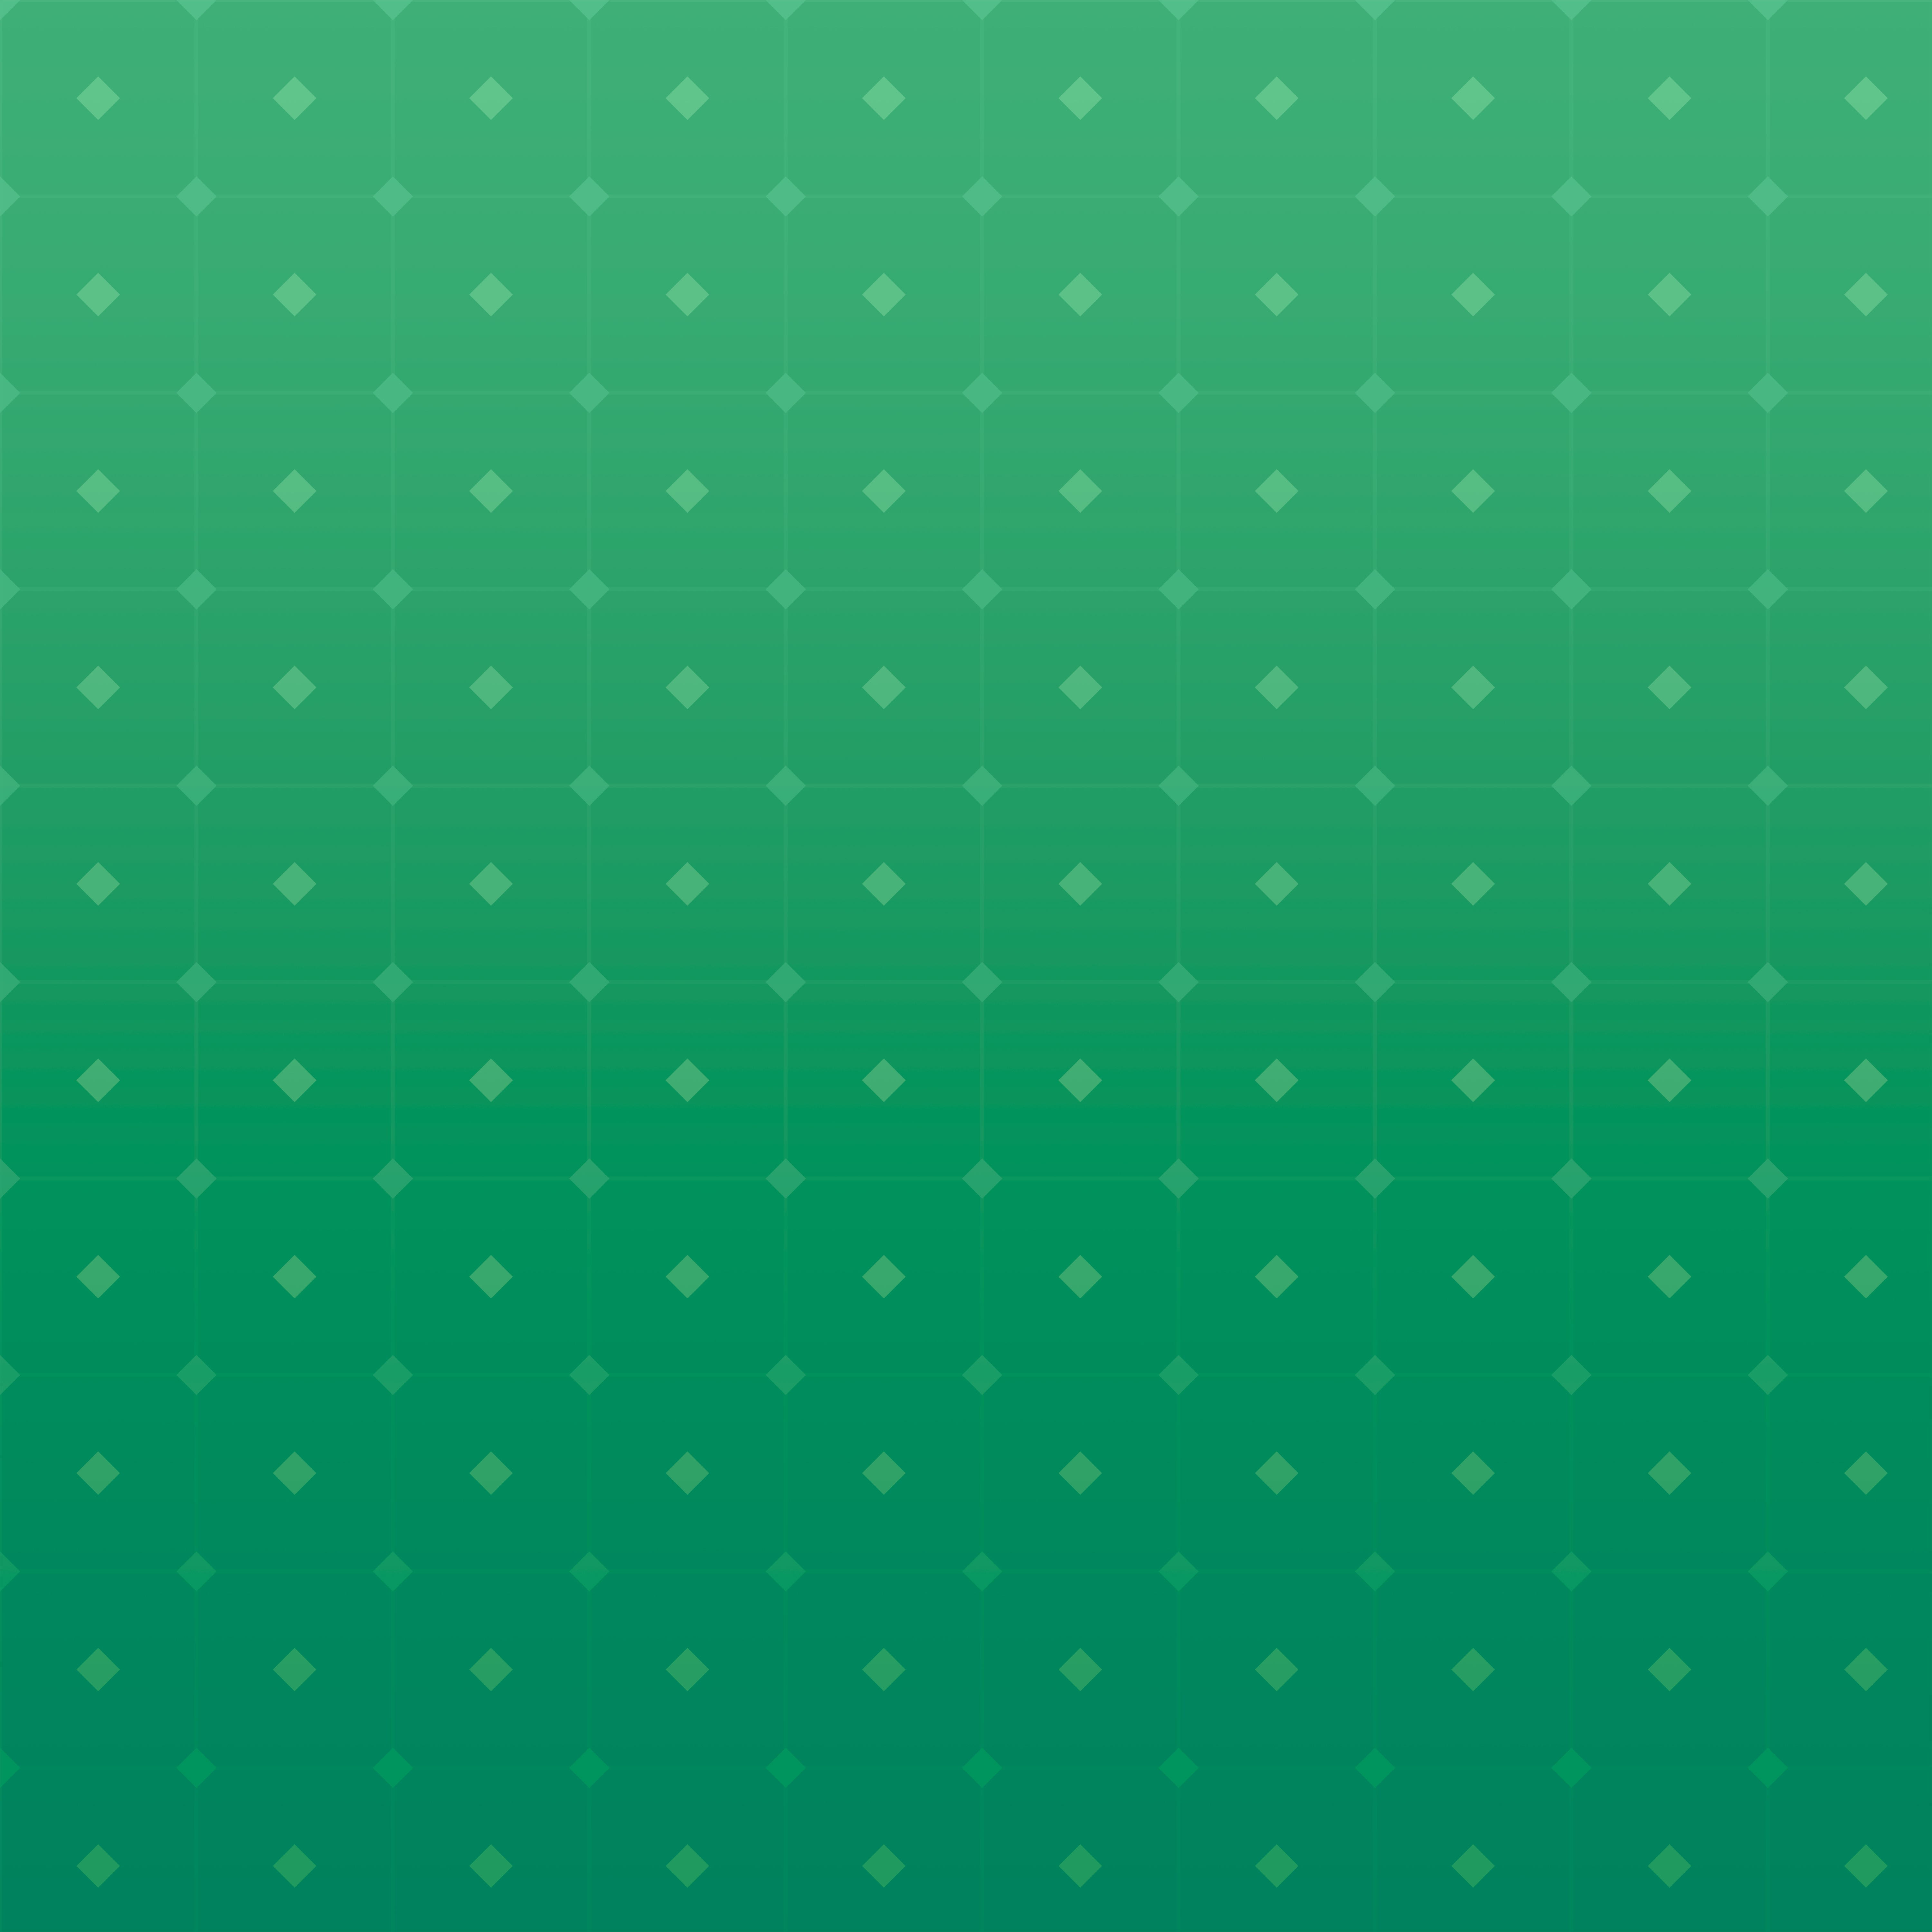 grid, gradient, green, pattern, texture, textures, squares for android